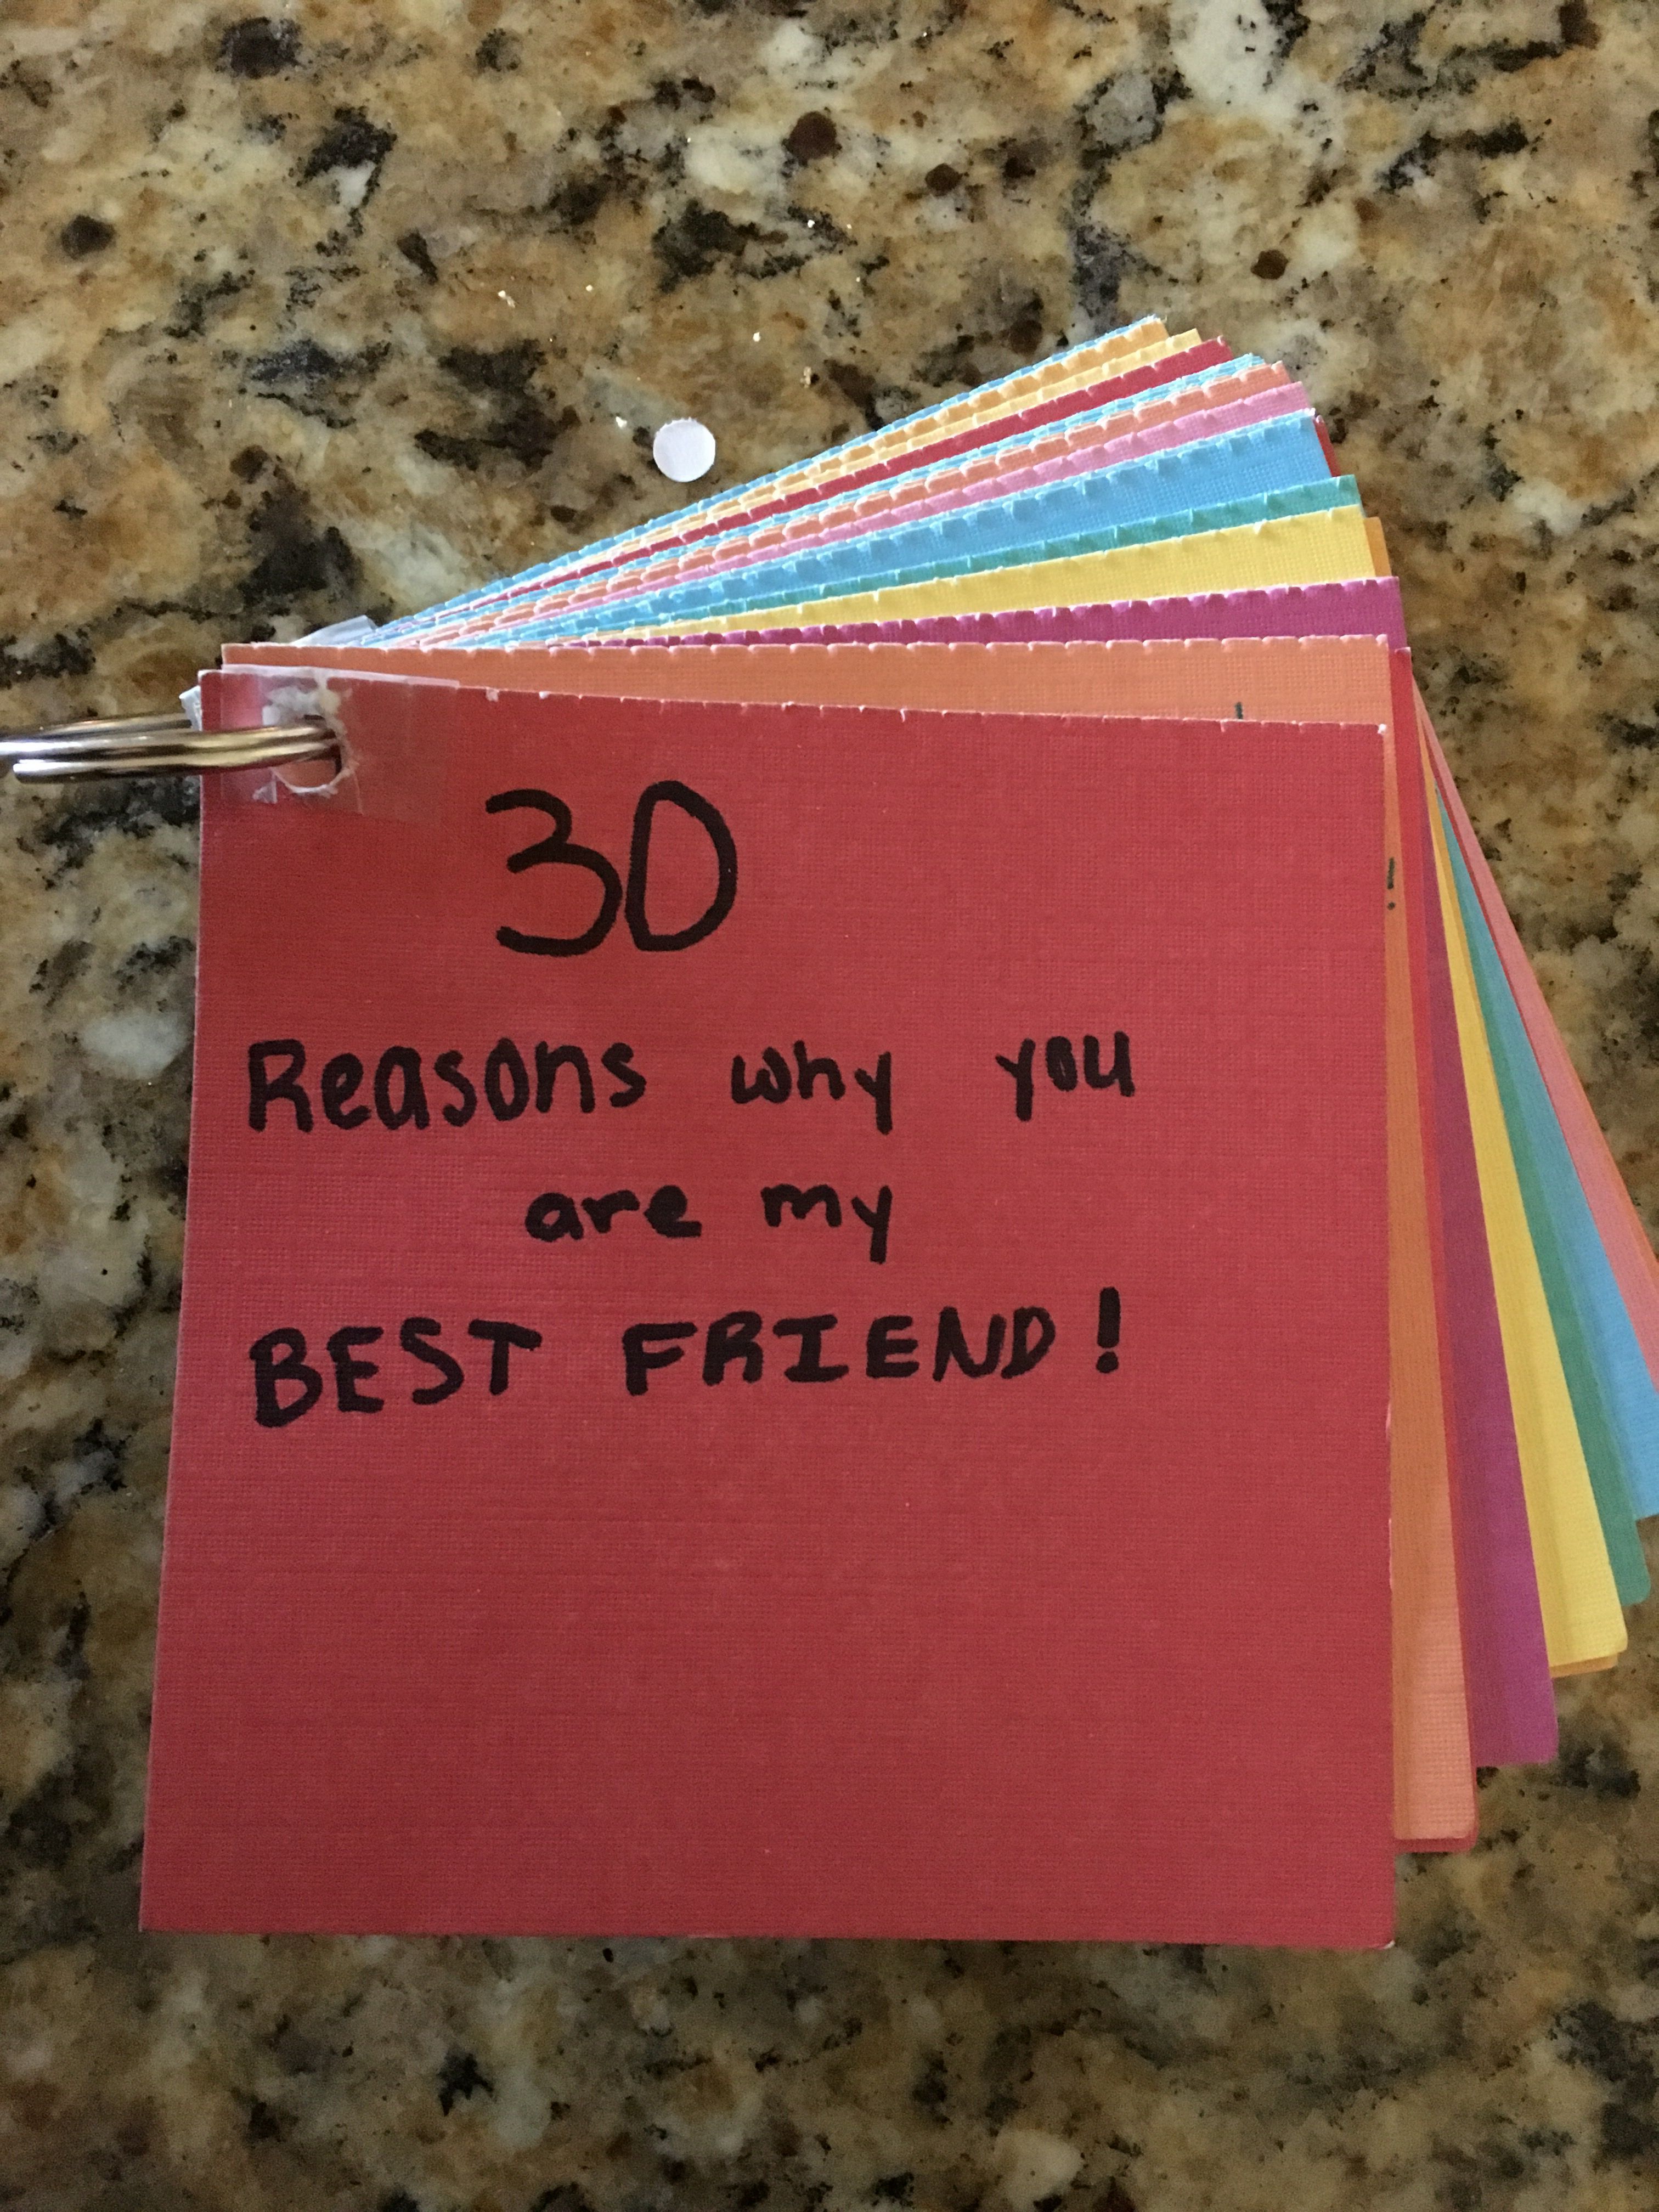 This is a gift for my friend I made… I did 30 reasons why you are my best friend.